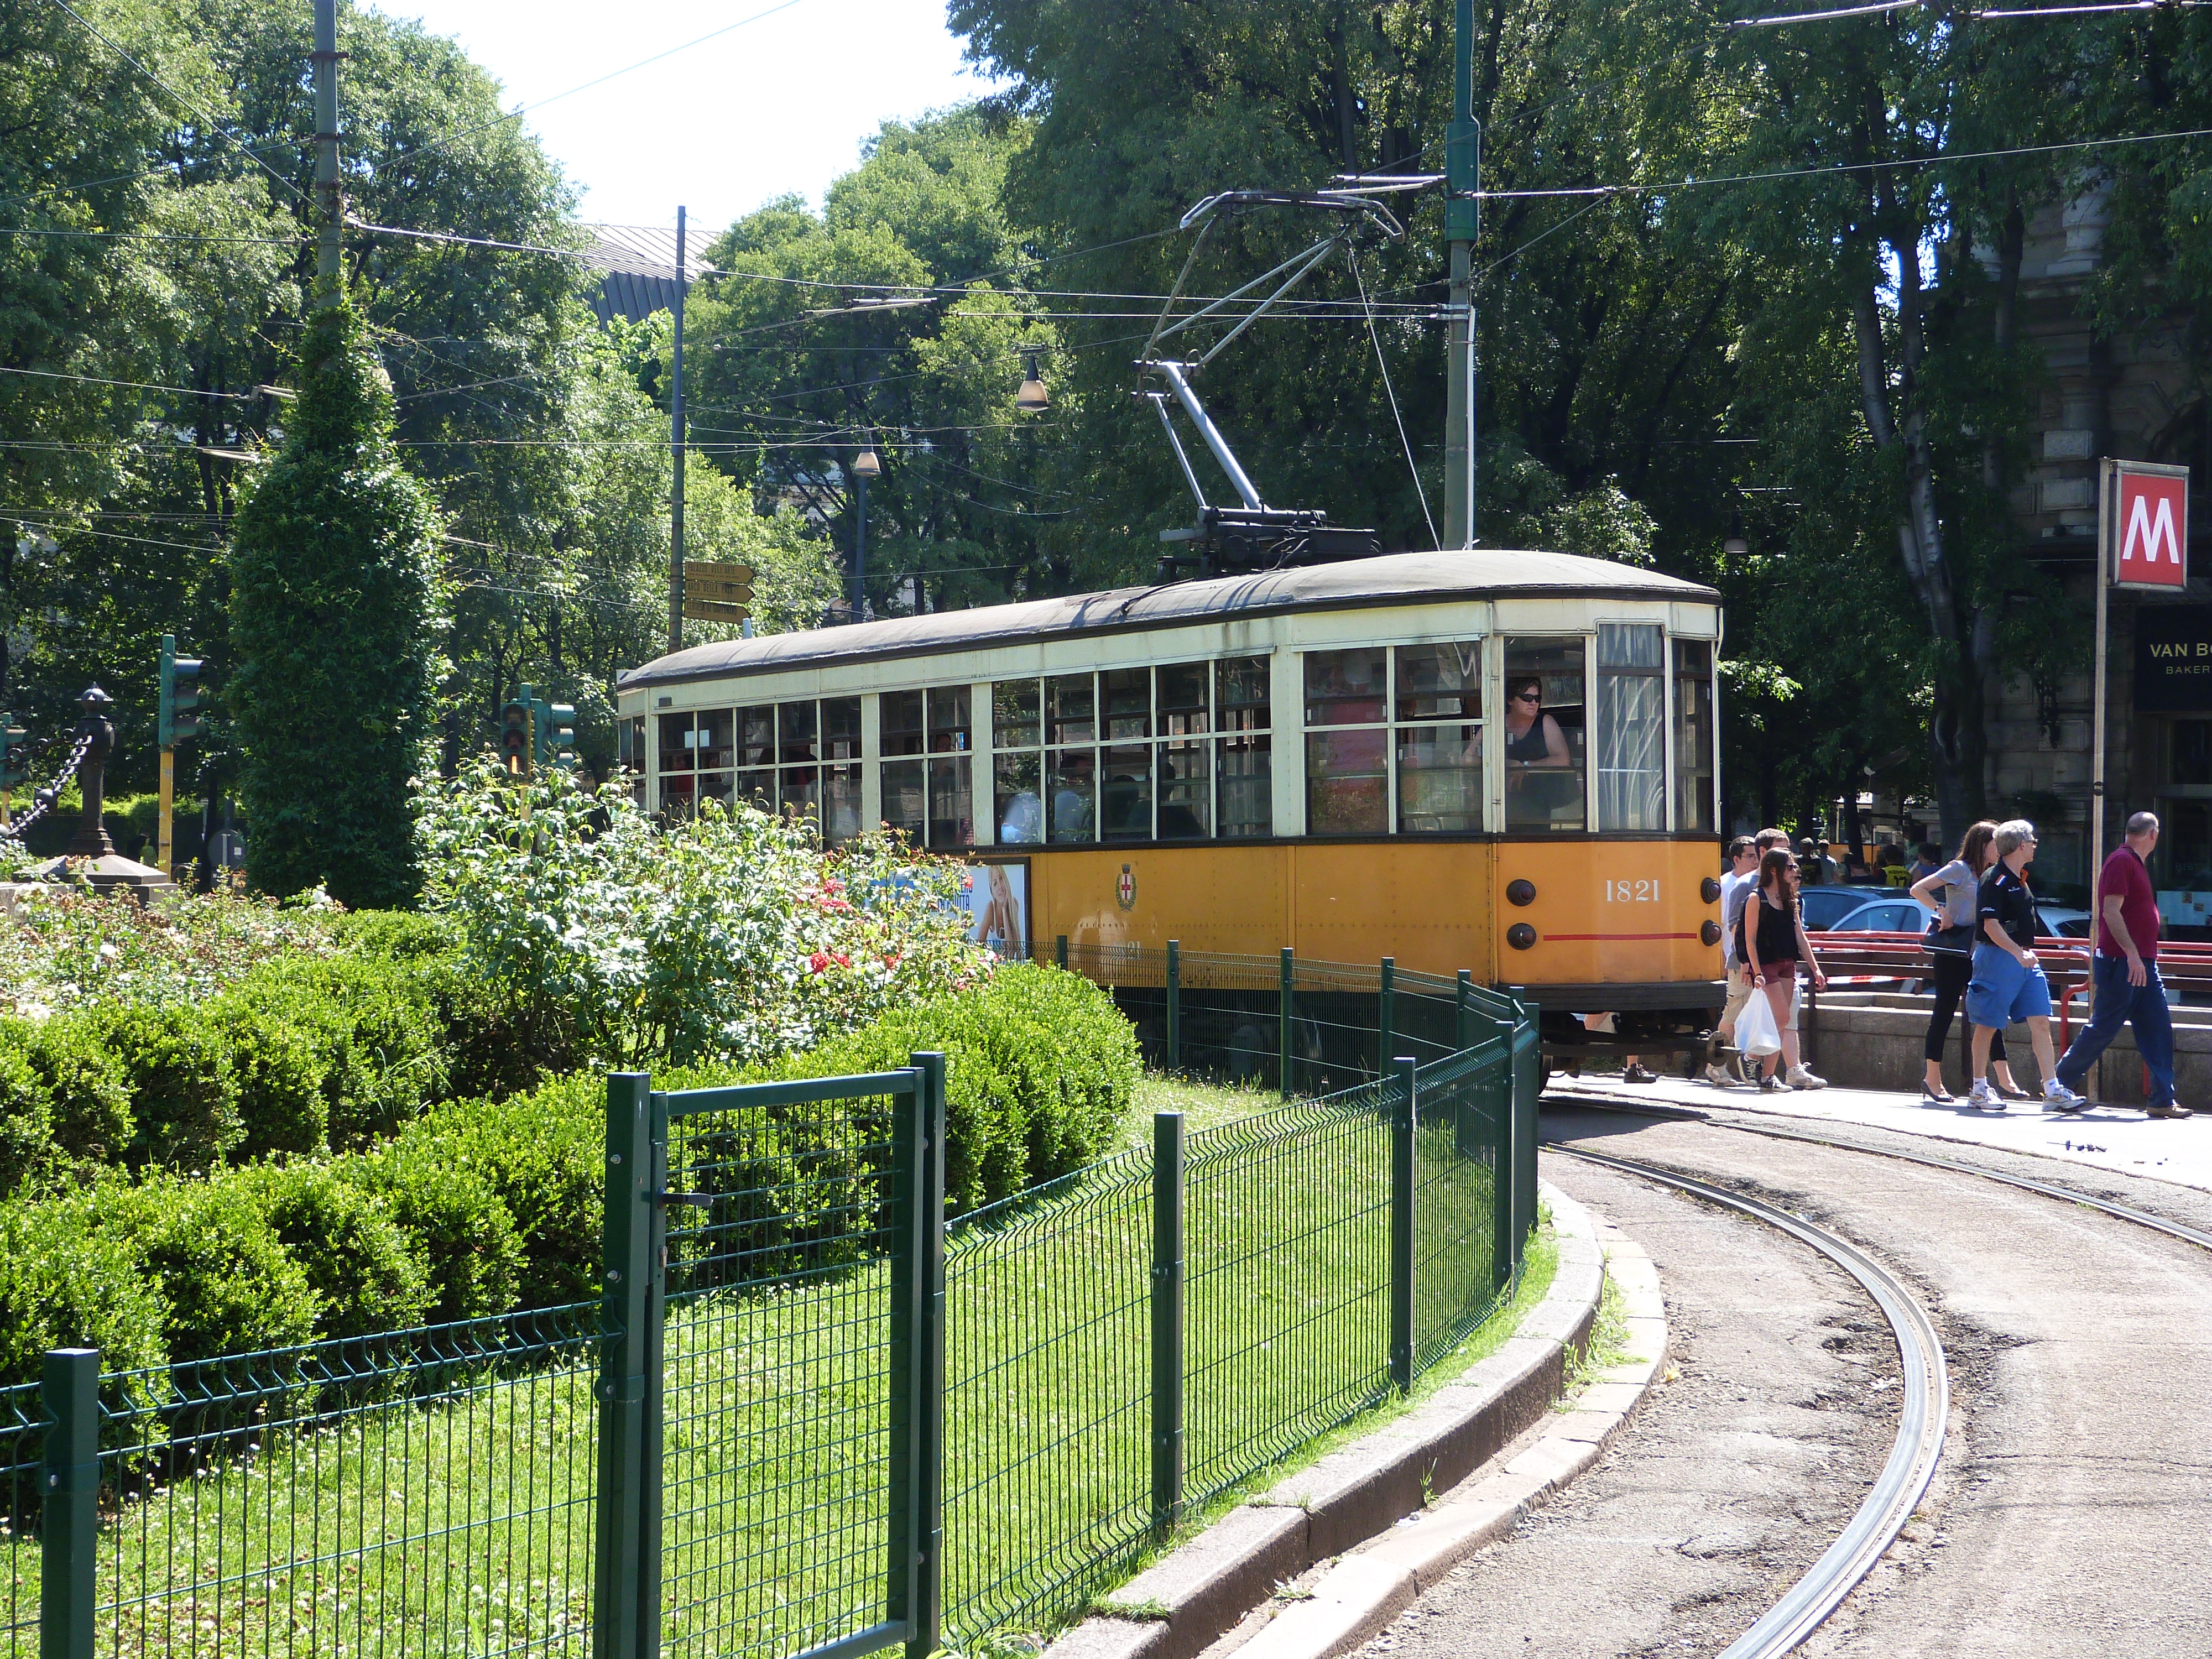 A tram lurking behind a nicely kept floral display